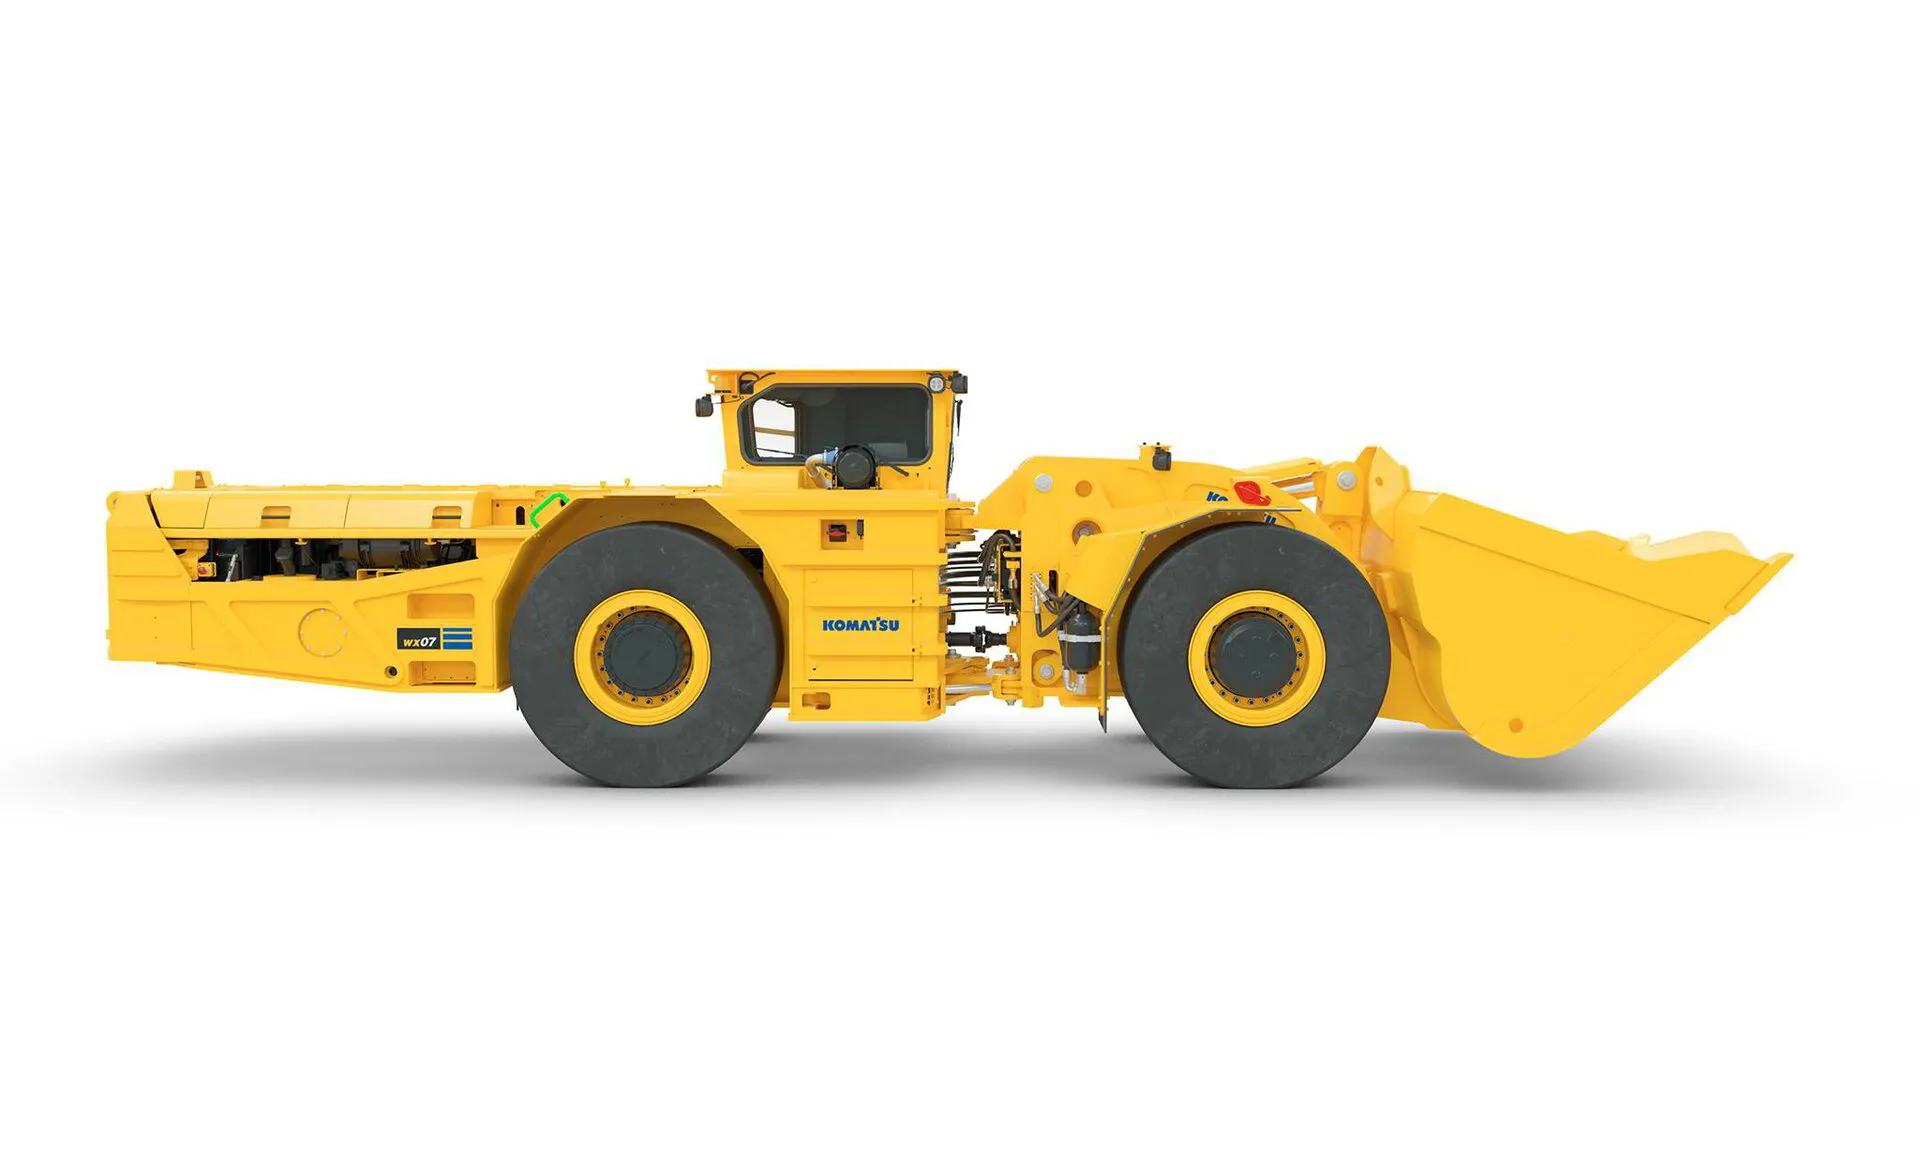 Komatsu WX07 LHD is one of the top 5 underground loaders on the market